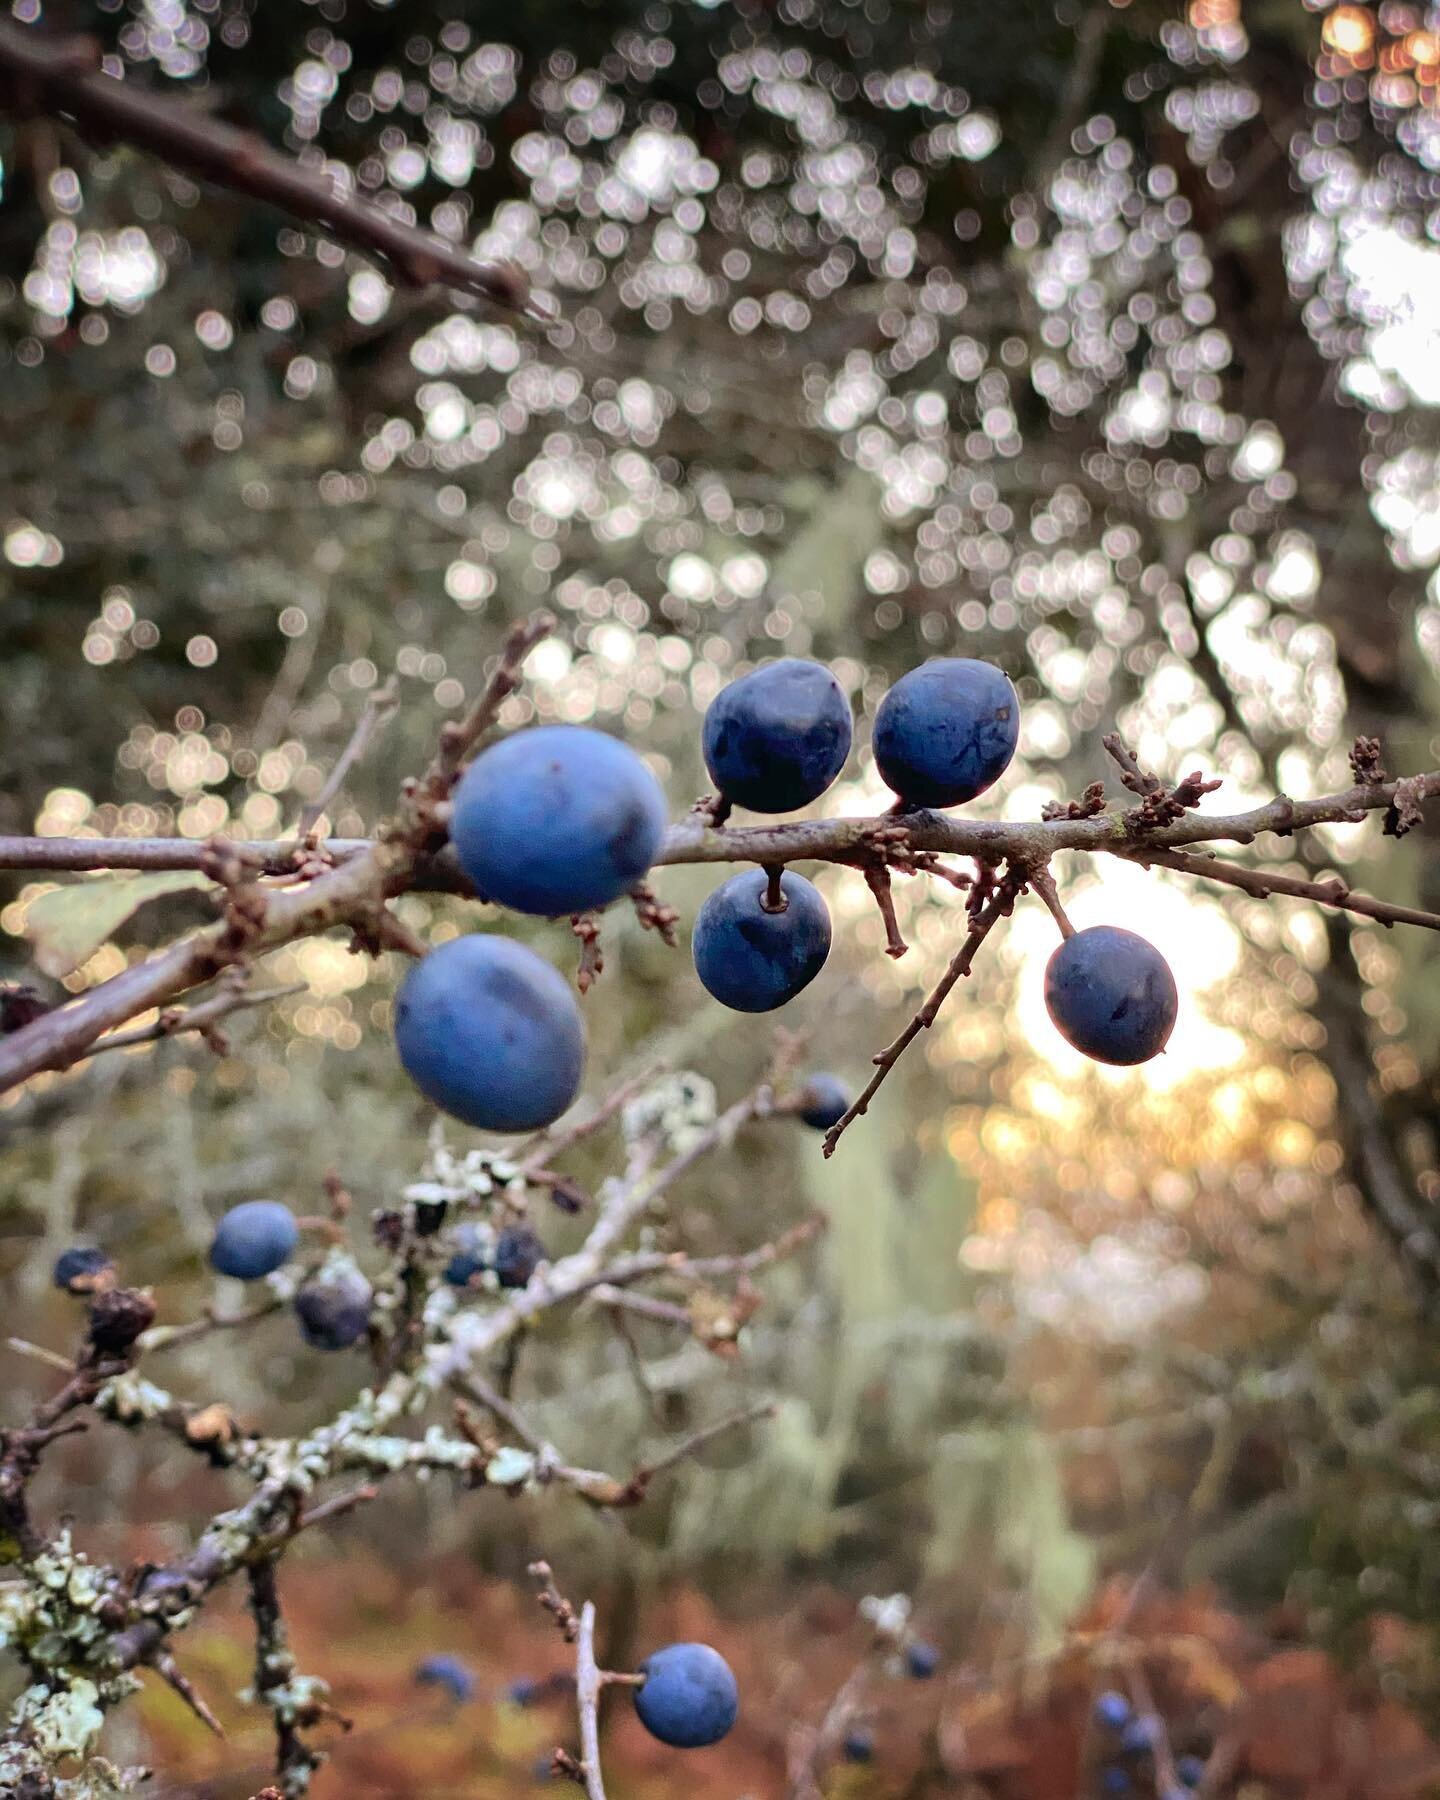 Possibly a clich&eacute; to mention Keats&rsquo; words about autumn being the season of mist and mellow fruitfulness but seeing the abundance of sloes here at the moment makes one think it nonetheless